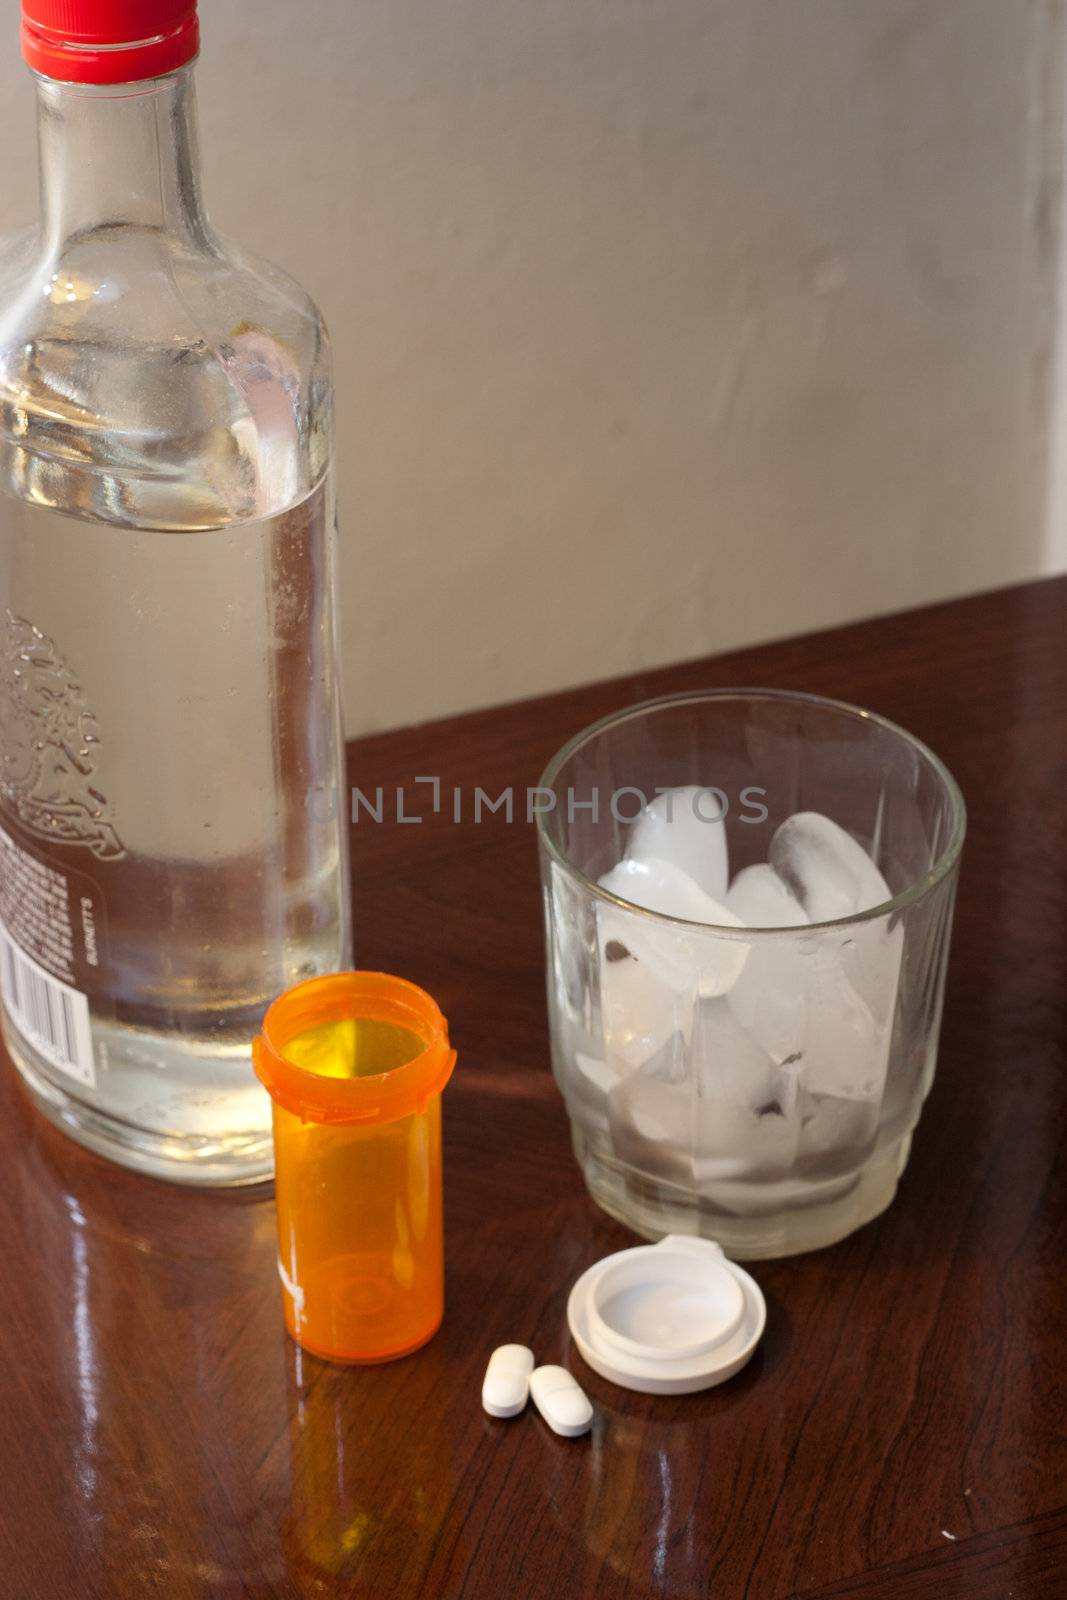 Liquor Bottle and Pills  by rothphotosc